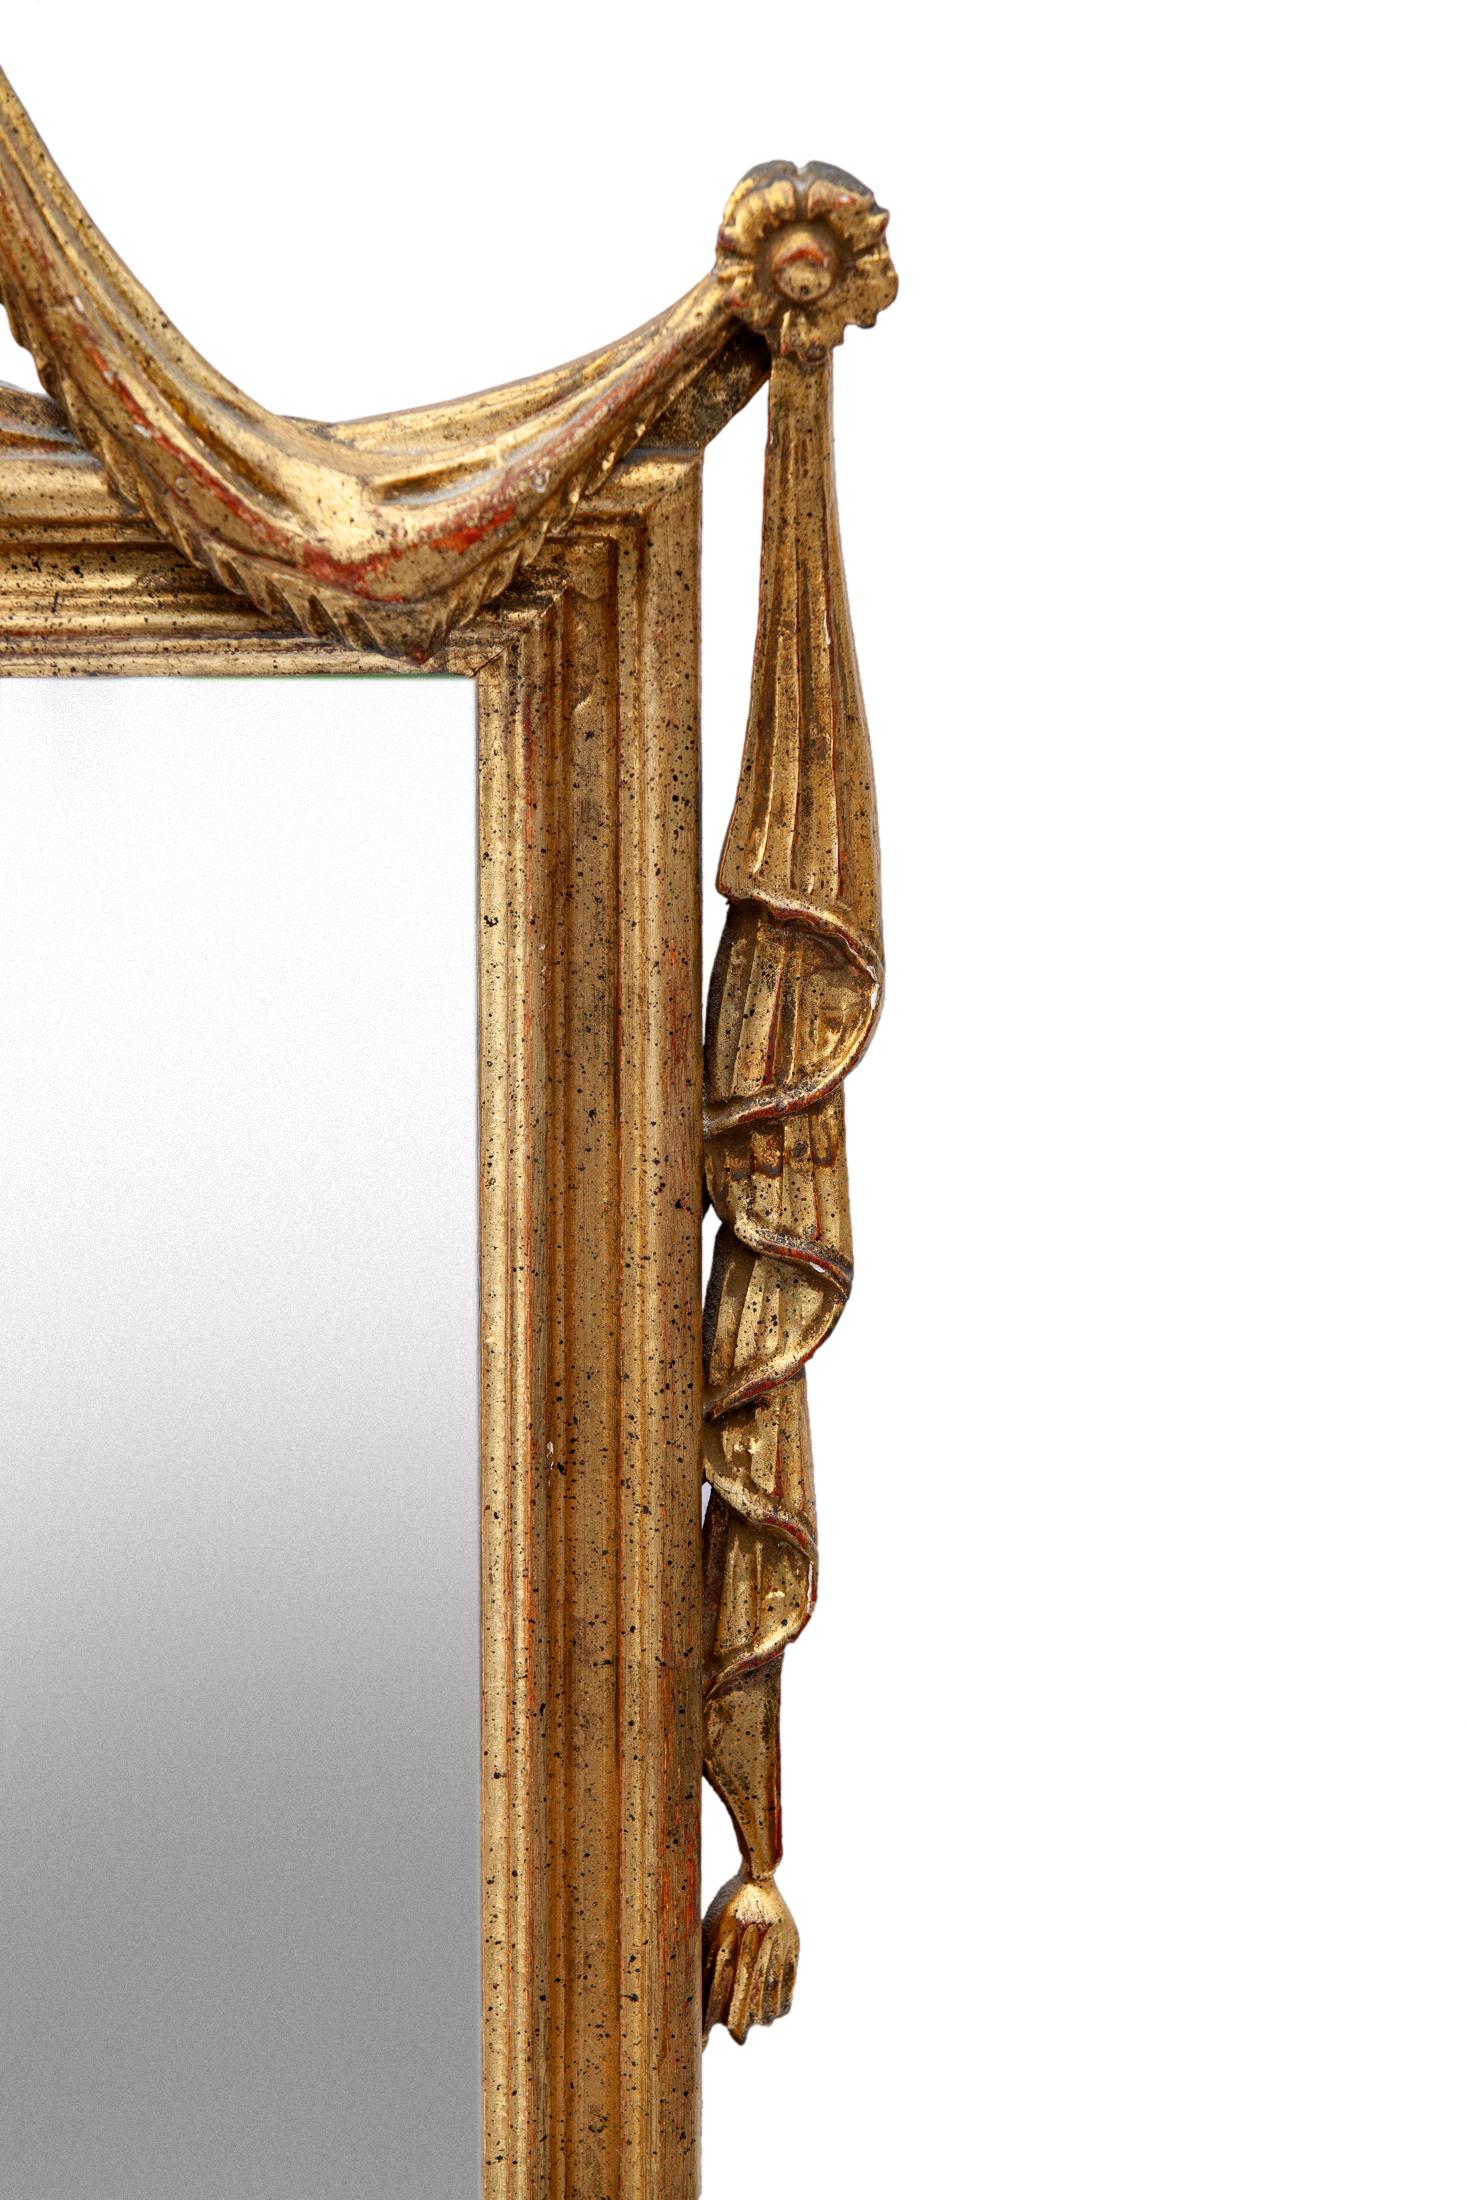 Italian Neoclassical Mirror with Urn & Swagged Drapery In Good Condition For Sale In Malibu, CA